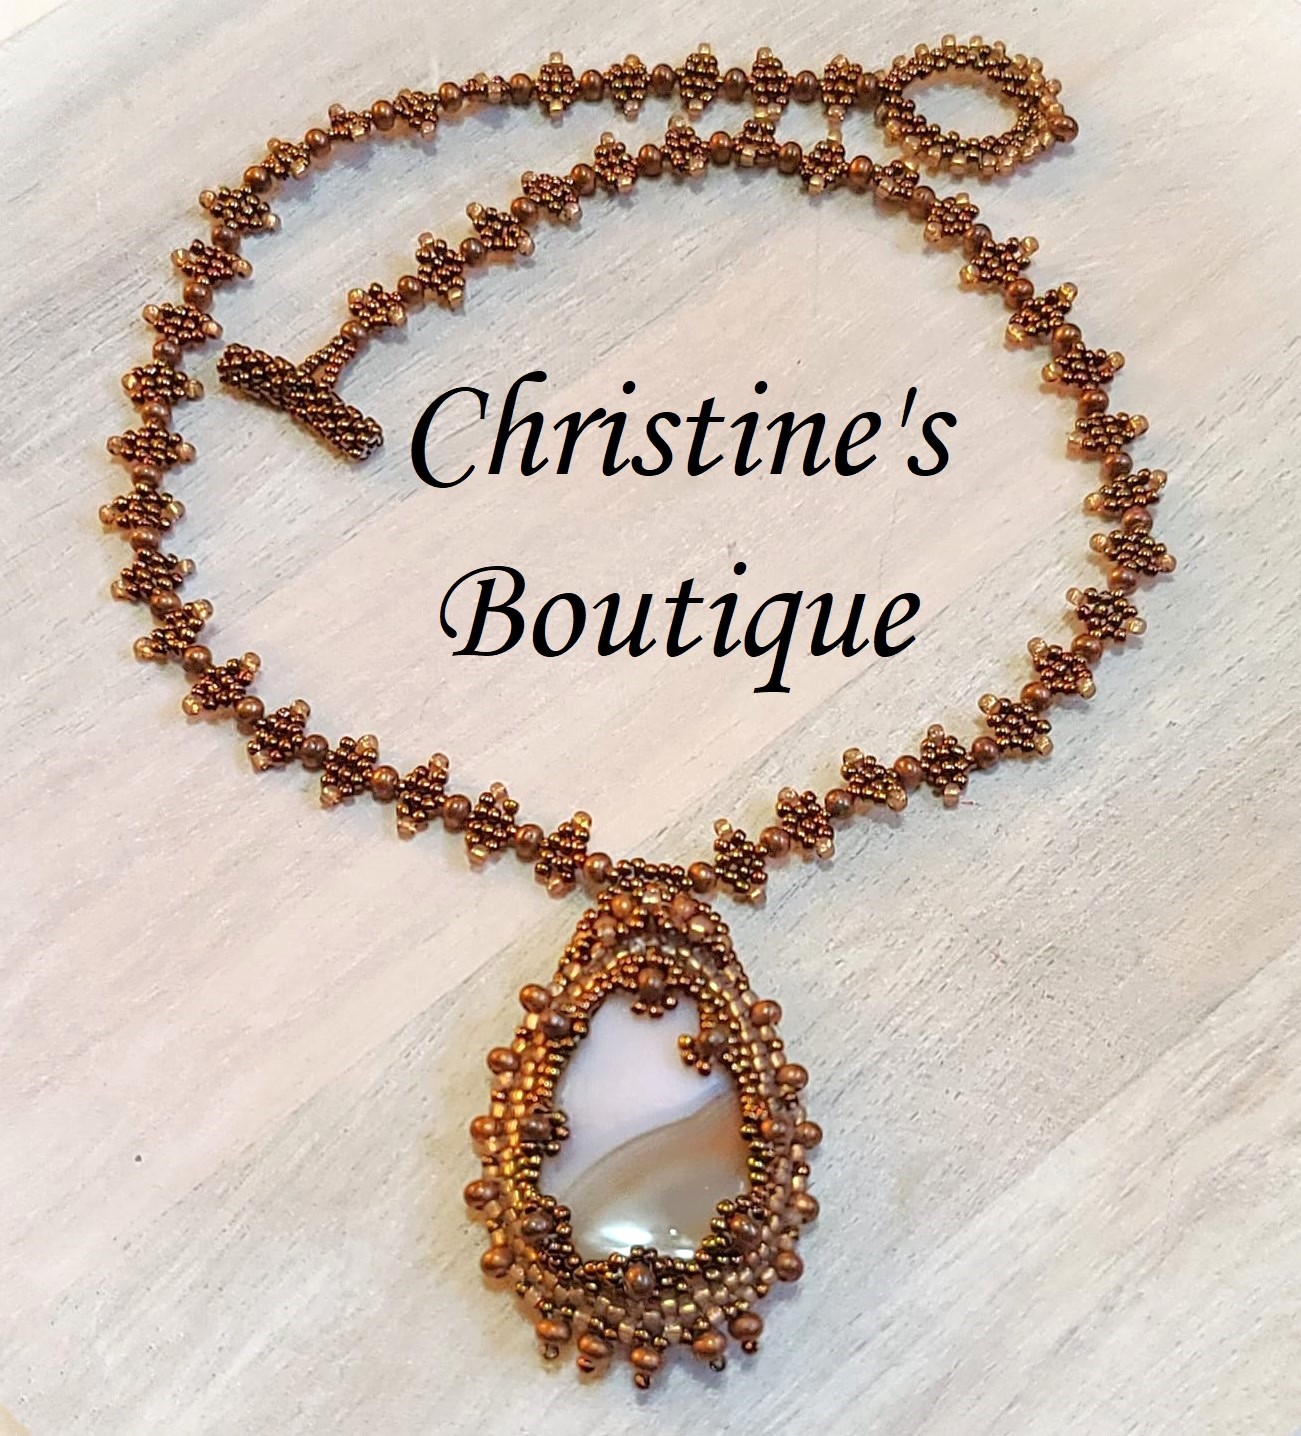 Quartz gemstone pendant necklace with a vintage inspired flair